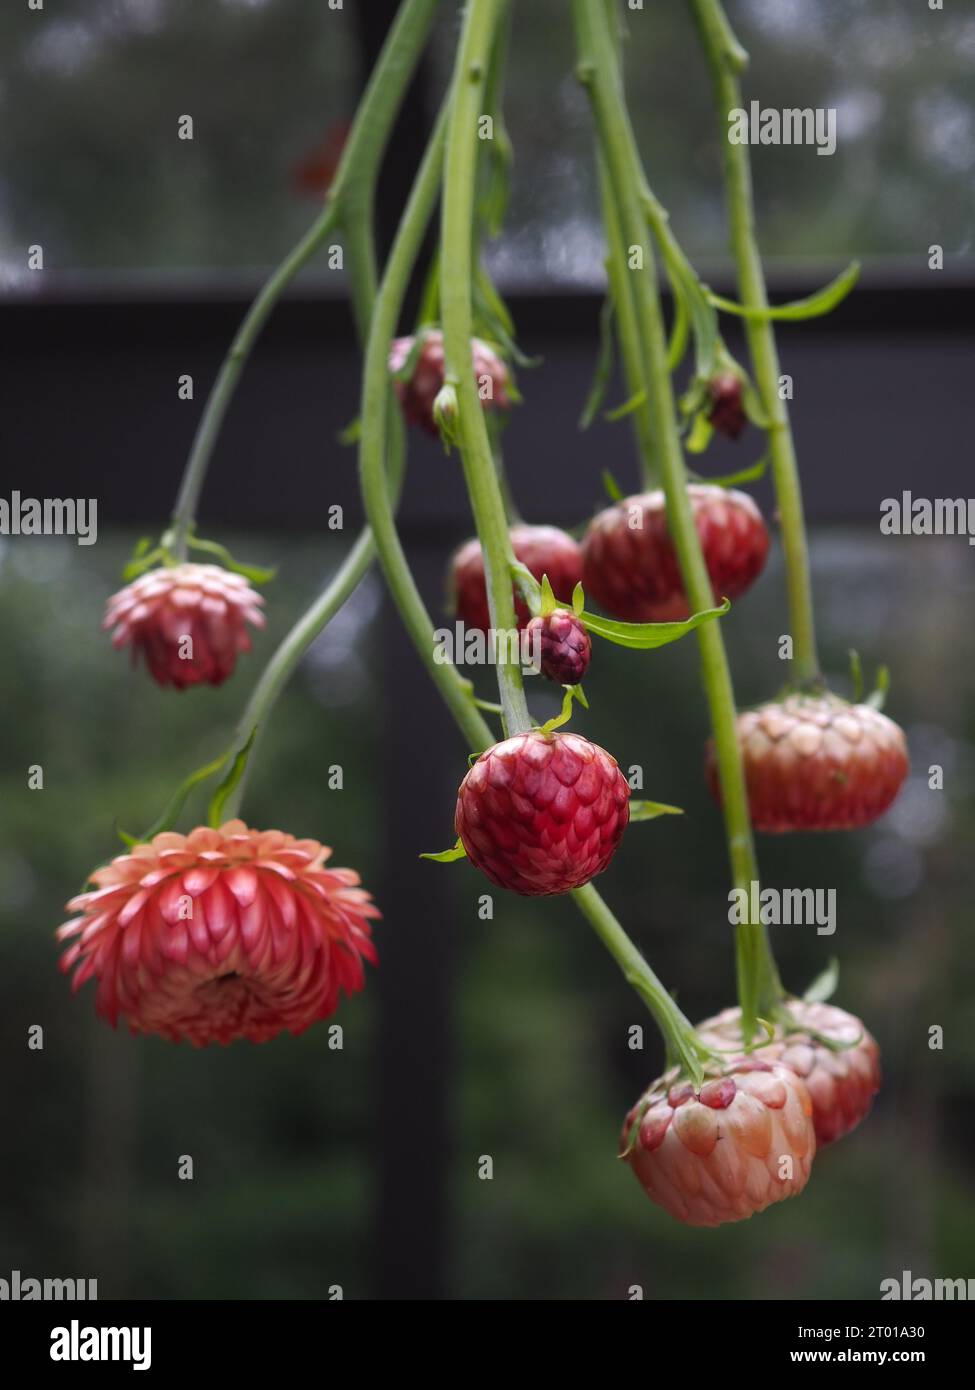 Hanging Xerochrysum bracteatum (Helichrysum) strawflowers or everlasting flowers to dry for floral arrangements in a greenhouse Stock Photo